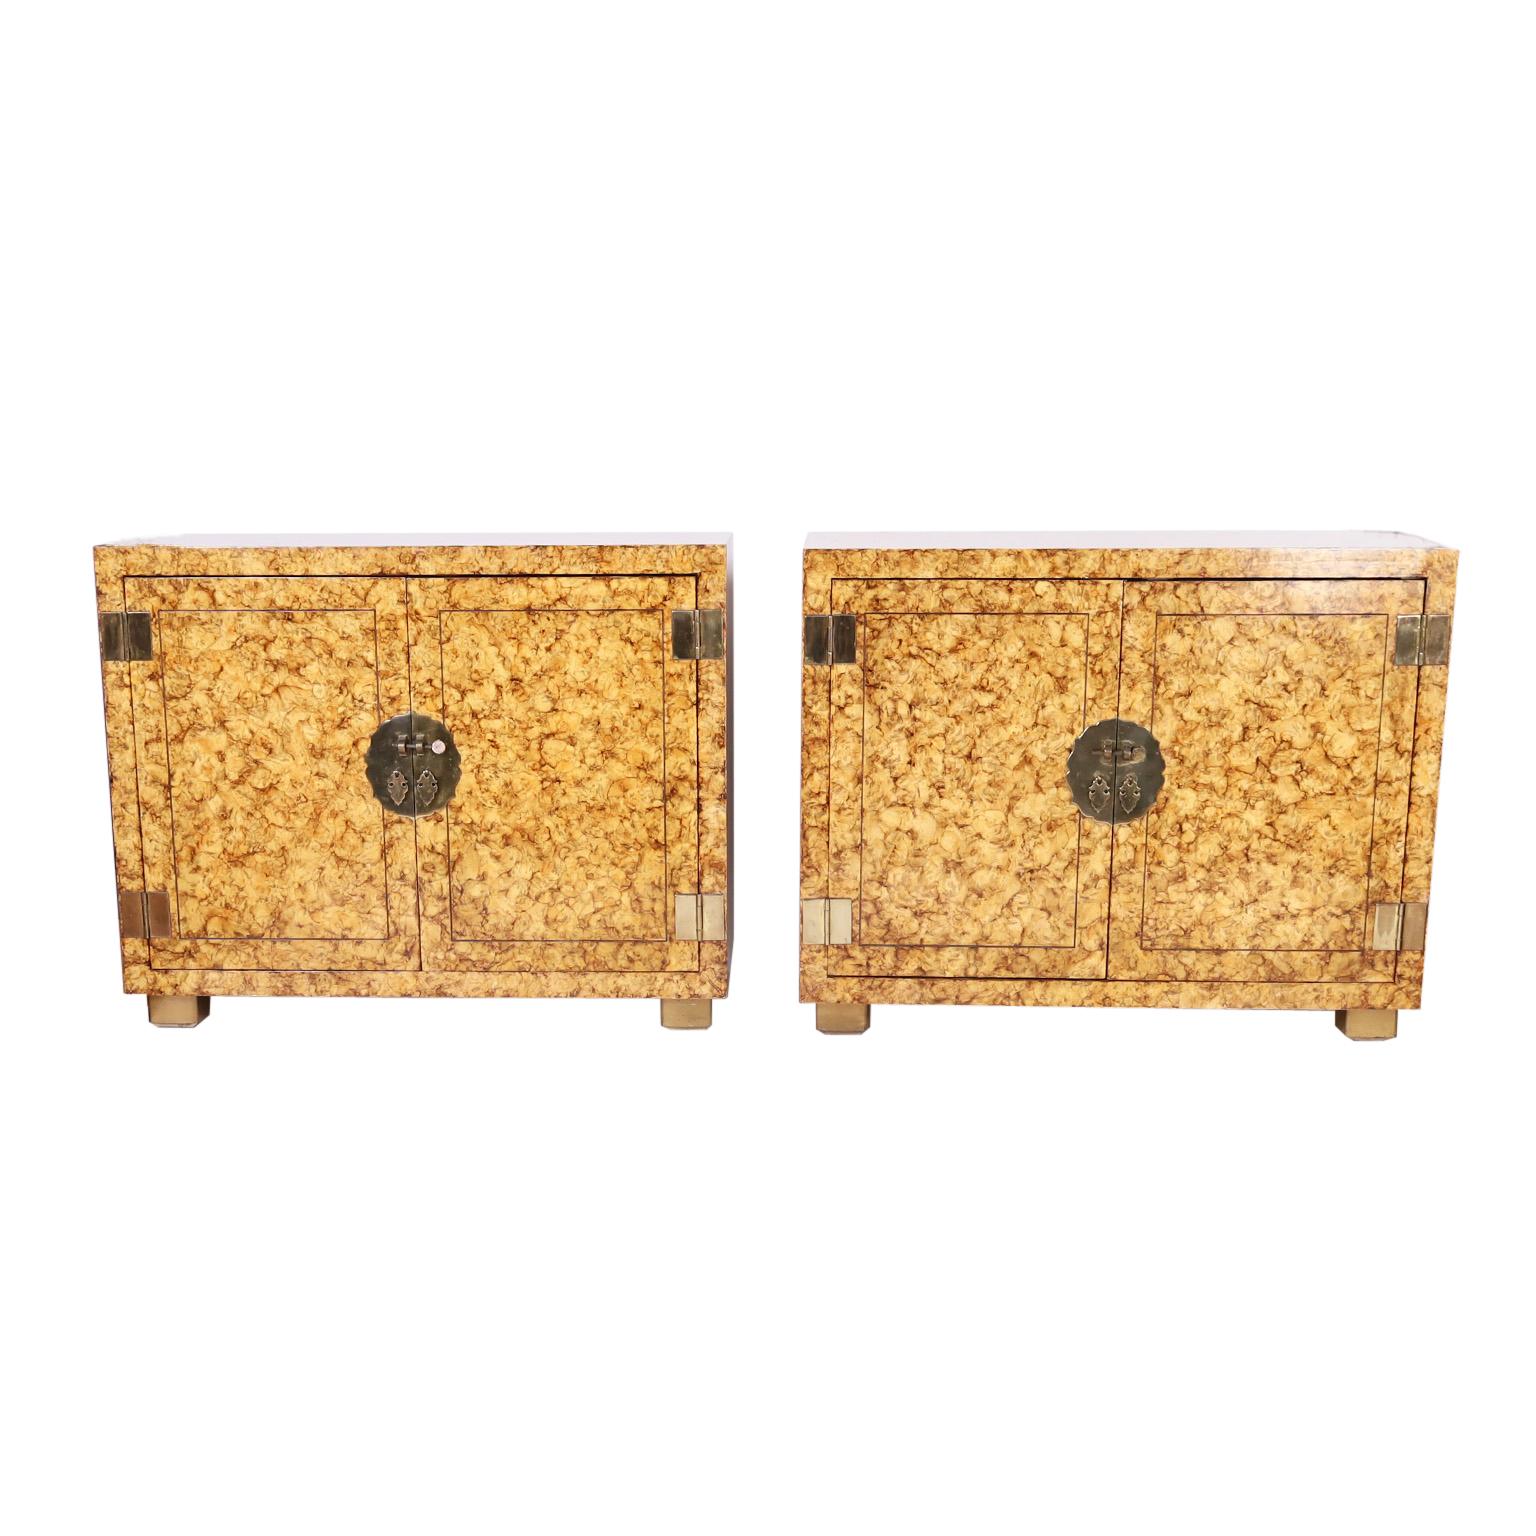 Striking pair of vintage cabinets crafted with hardwoods in a sleek asian style with brass hardware and featuring a chic stylized faux tortoise finish. Signed Henredon in a drawer.